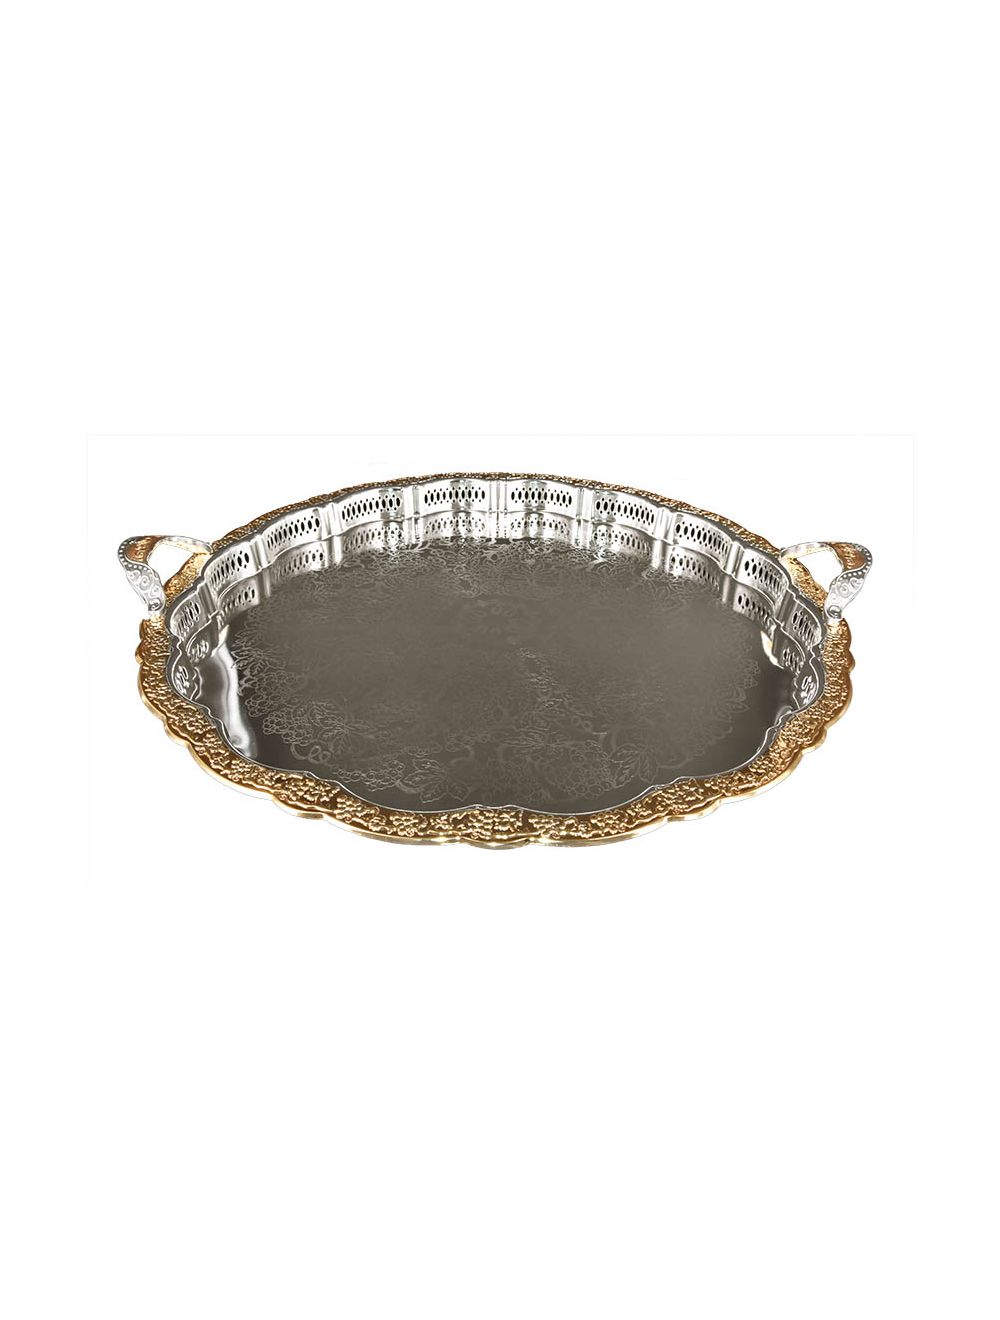 Tray Gold and Silver Plated Round Design